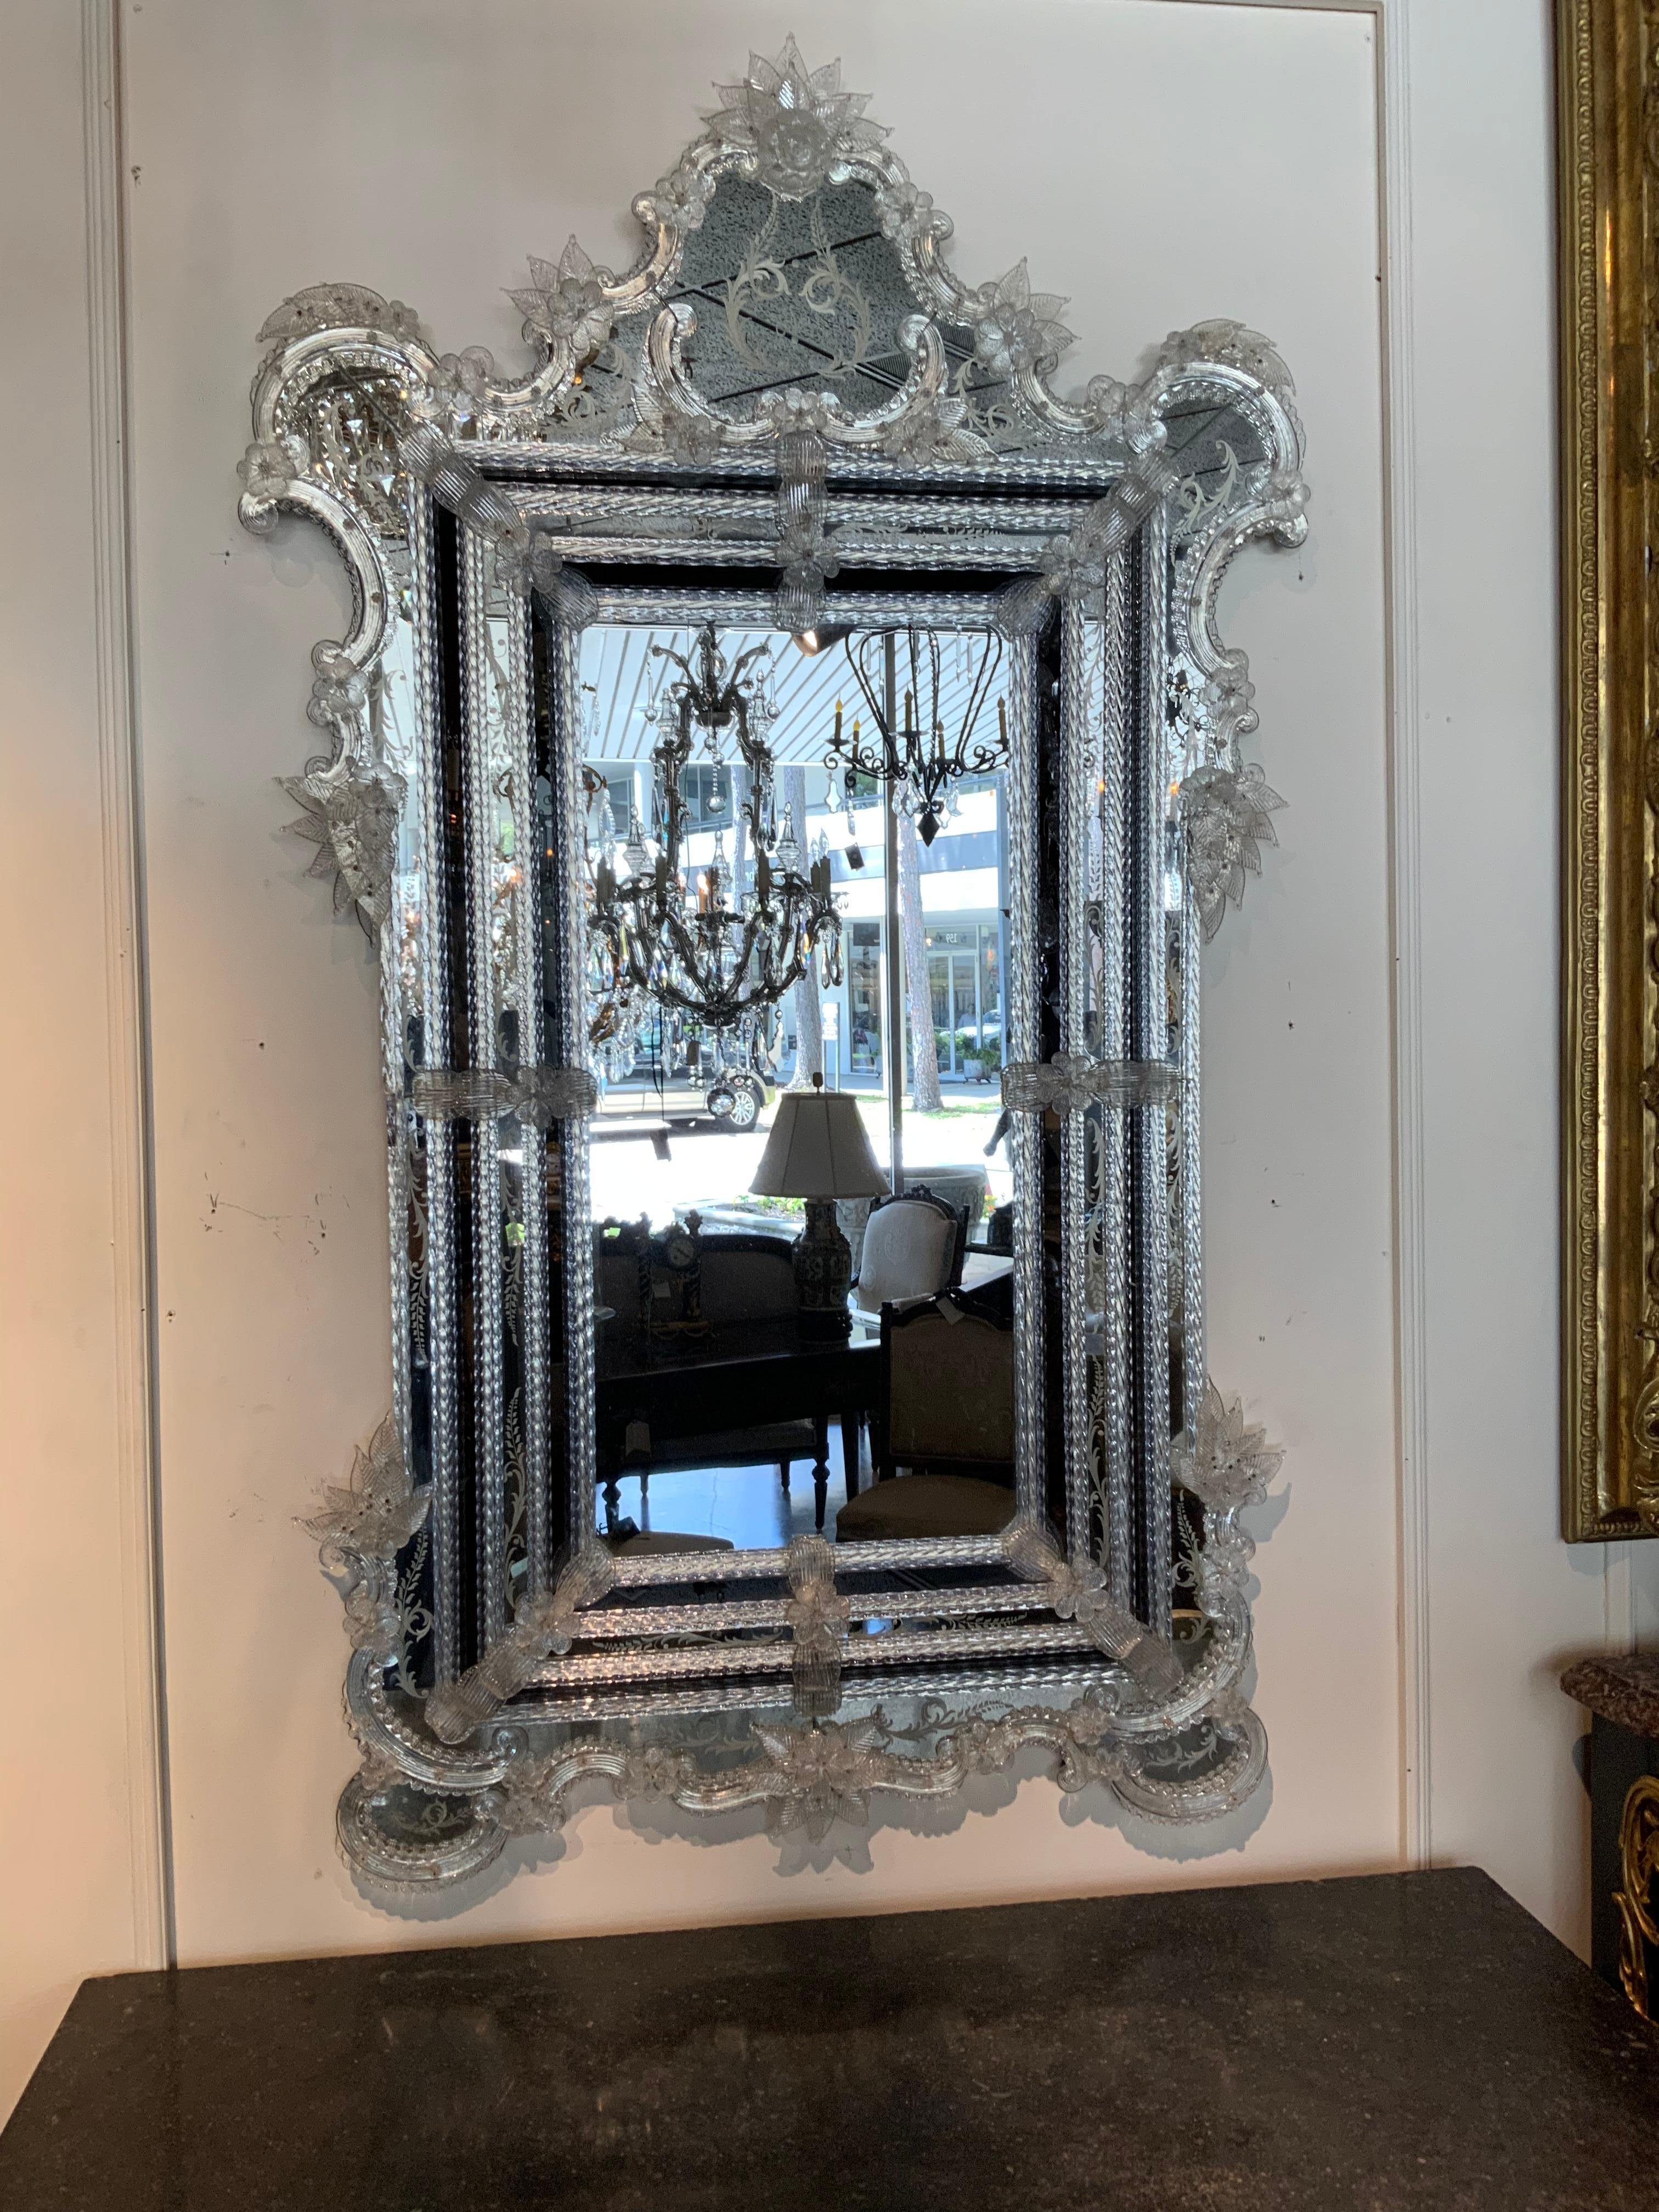 This mirror is large and the glass is all very clear without
Age spots. The flowers are all in great condition without
Chips or breaks. The scrolling glass is very graceful with
Exquisite lines.